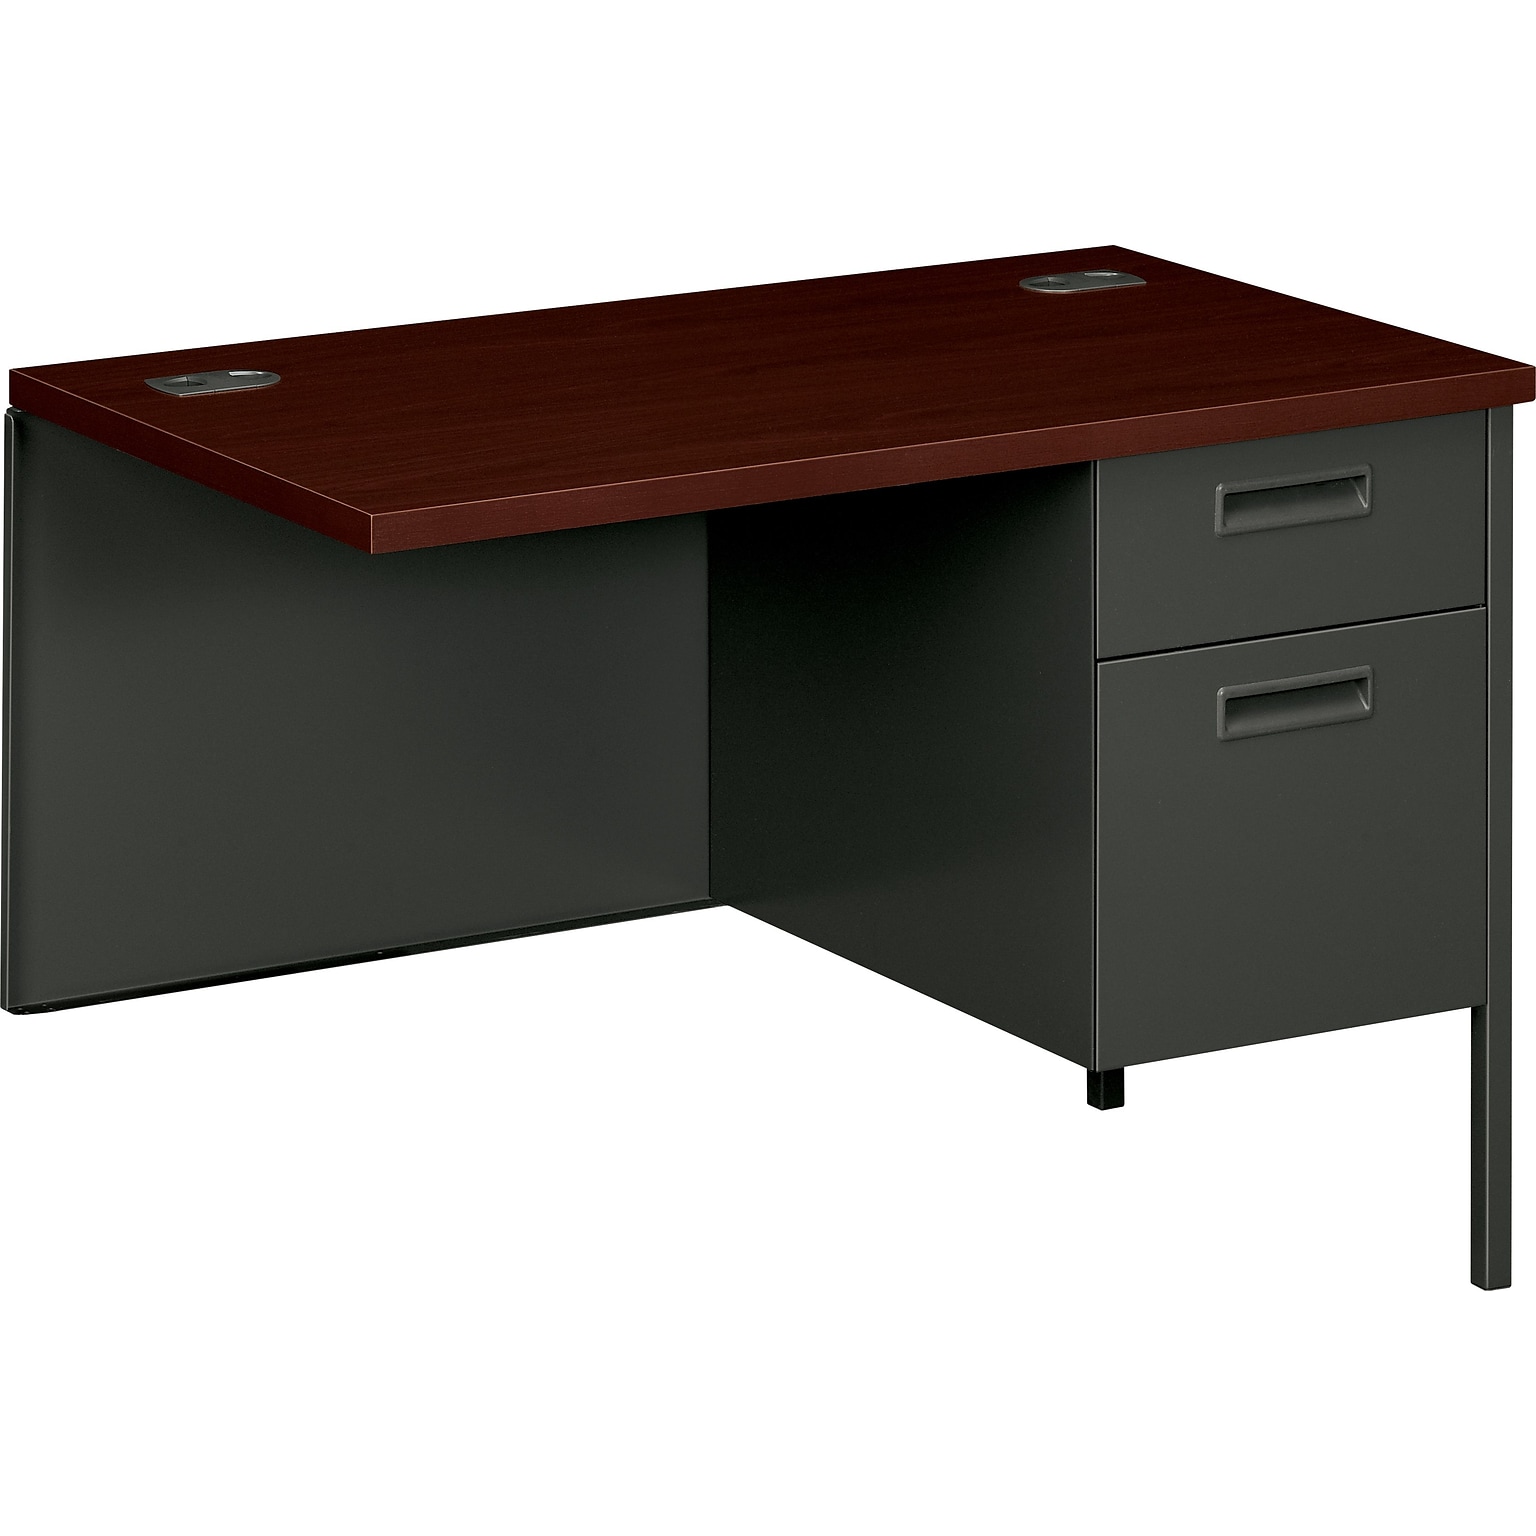 HON® Metro Classic Series Metal Office Suite in Mahogany/Charcoal Finish; Right Return